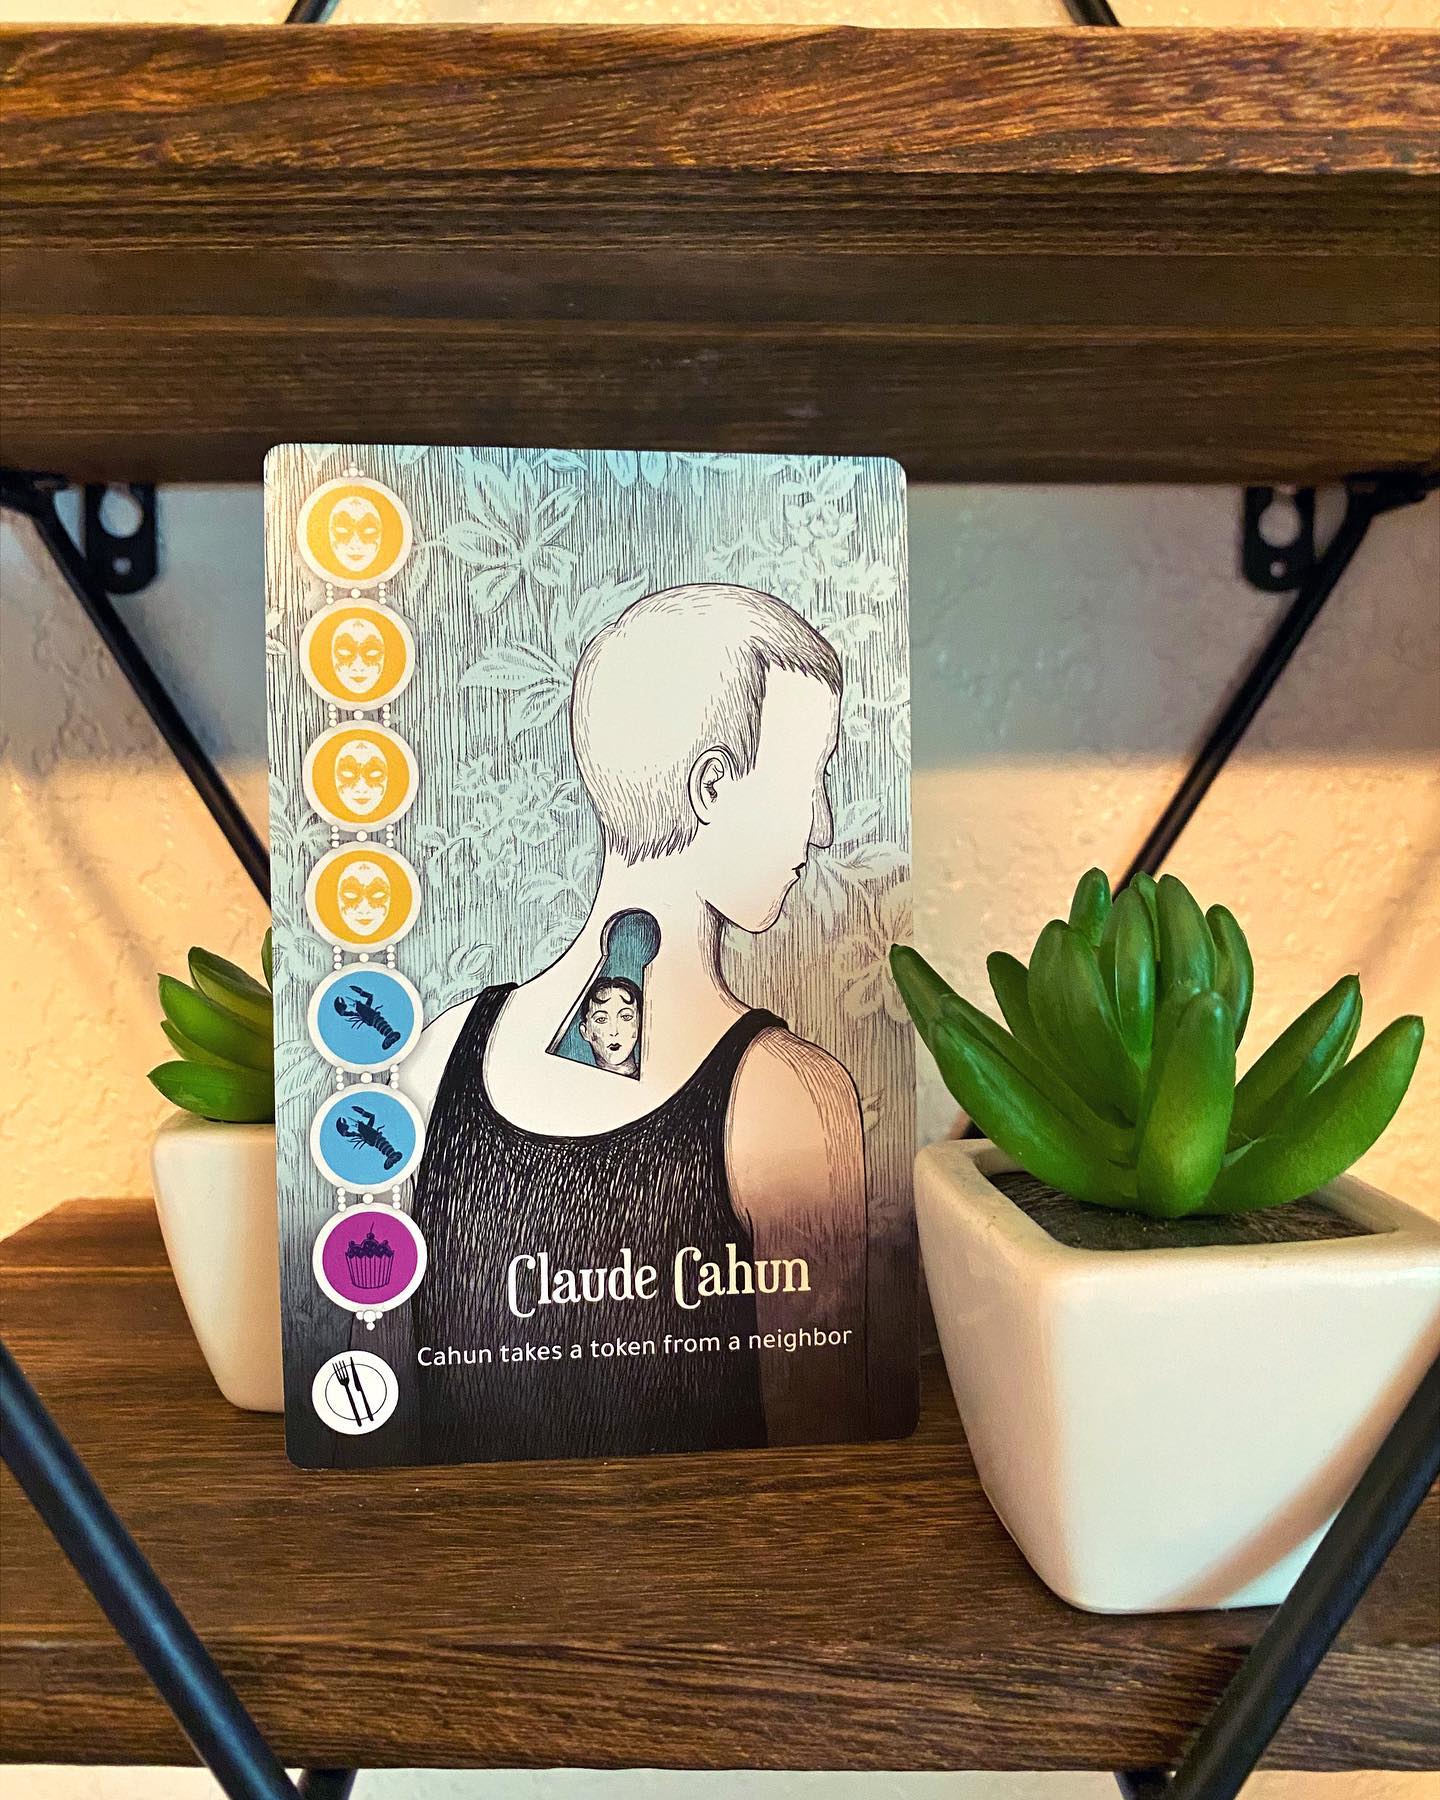 Today is Surrealist artist Claude Cahun’s 127th birthday! Cahun was known for their exploration of gender norms through photography. To celebrate Cahun today, we’re dressing up in outfits that feel the most genuinely us and taking cute selfies 💁🏻‍♀️

#boardgames #boardgamephotography #bgg #tabletopgames #indieboardgames #boardgamegeek #boardgamesofinstagram #cardgames #surrealism #surrealart #claudecahun #birthday #resonym